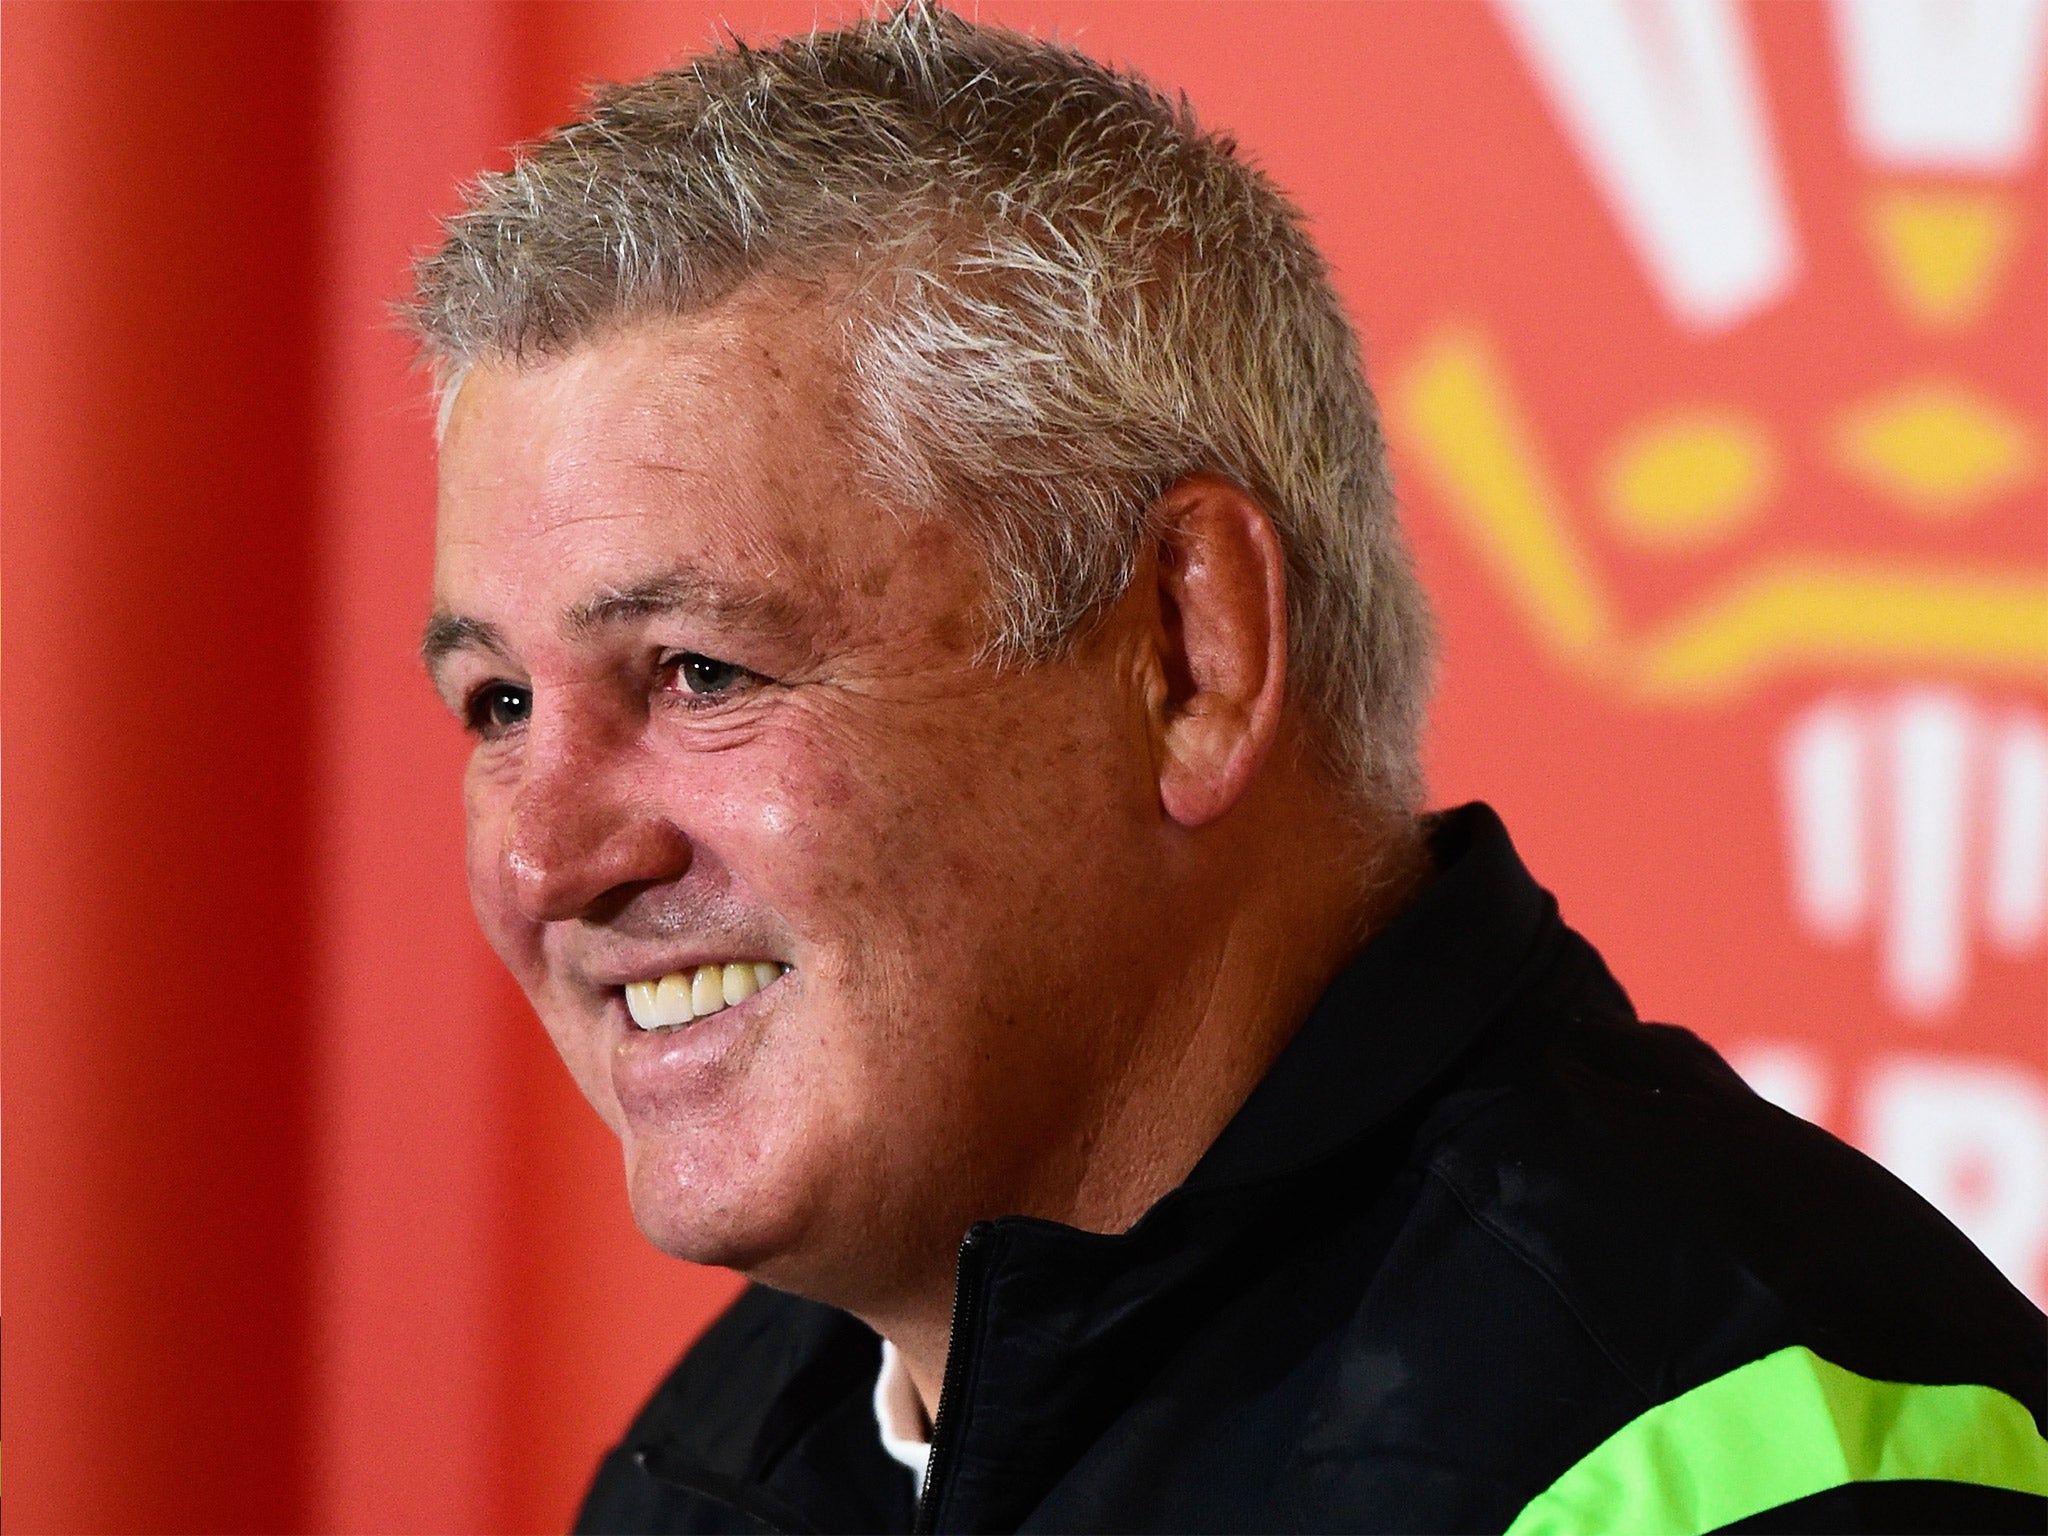 Gatland: England are still debating where they are going, particularly in midfield